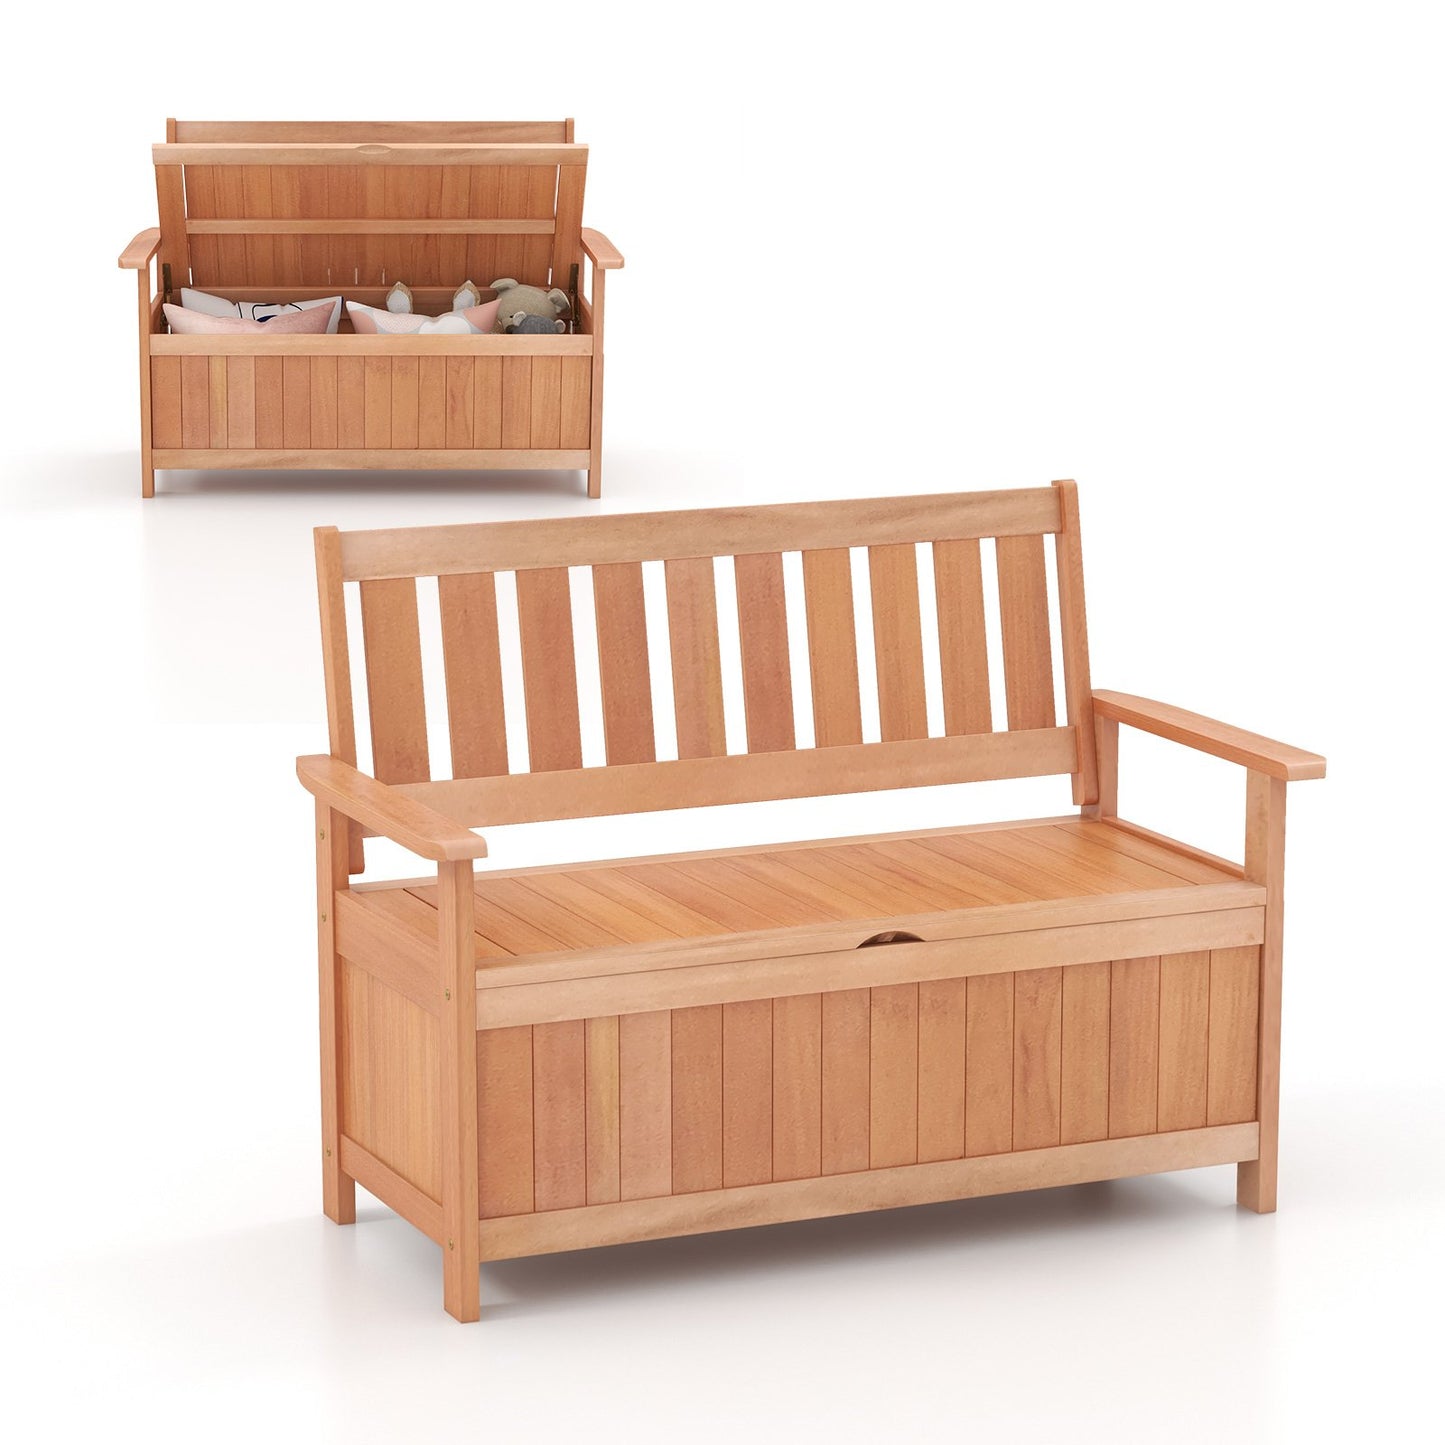 48 Inch Patio Wood Storage Bench with Slatted Backrest, Natural at Gallery Canada